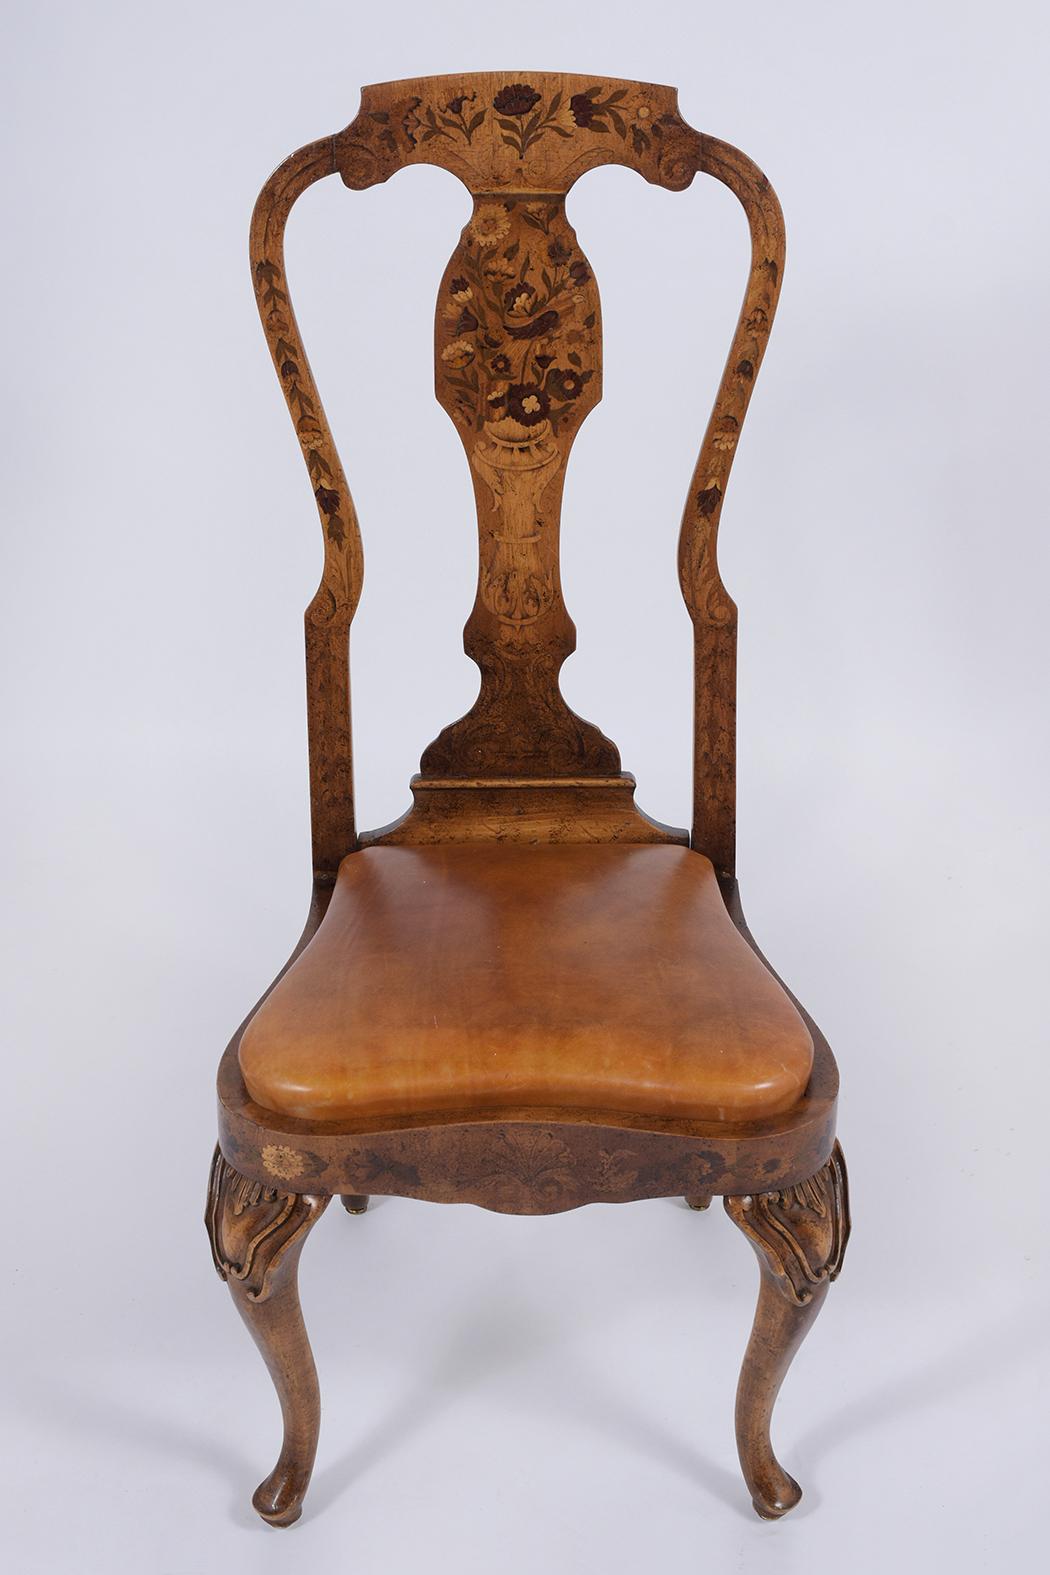 A remarkable Early 19th Century Side Chair is crafted out of cherry wood with beautiful inlaid veneers and is in great condition. This side chair features a high back carved frame with intricate inlaid details throughout and comes with an upholstery